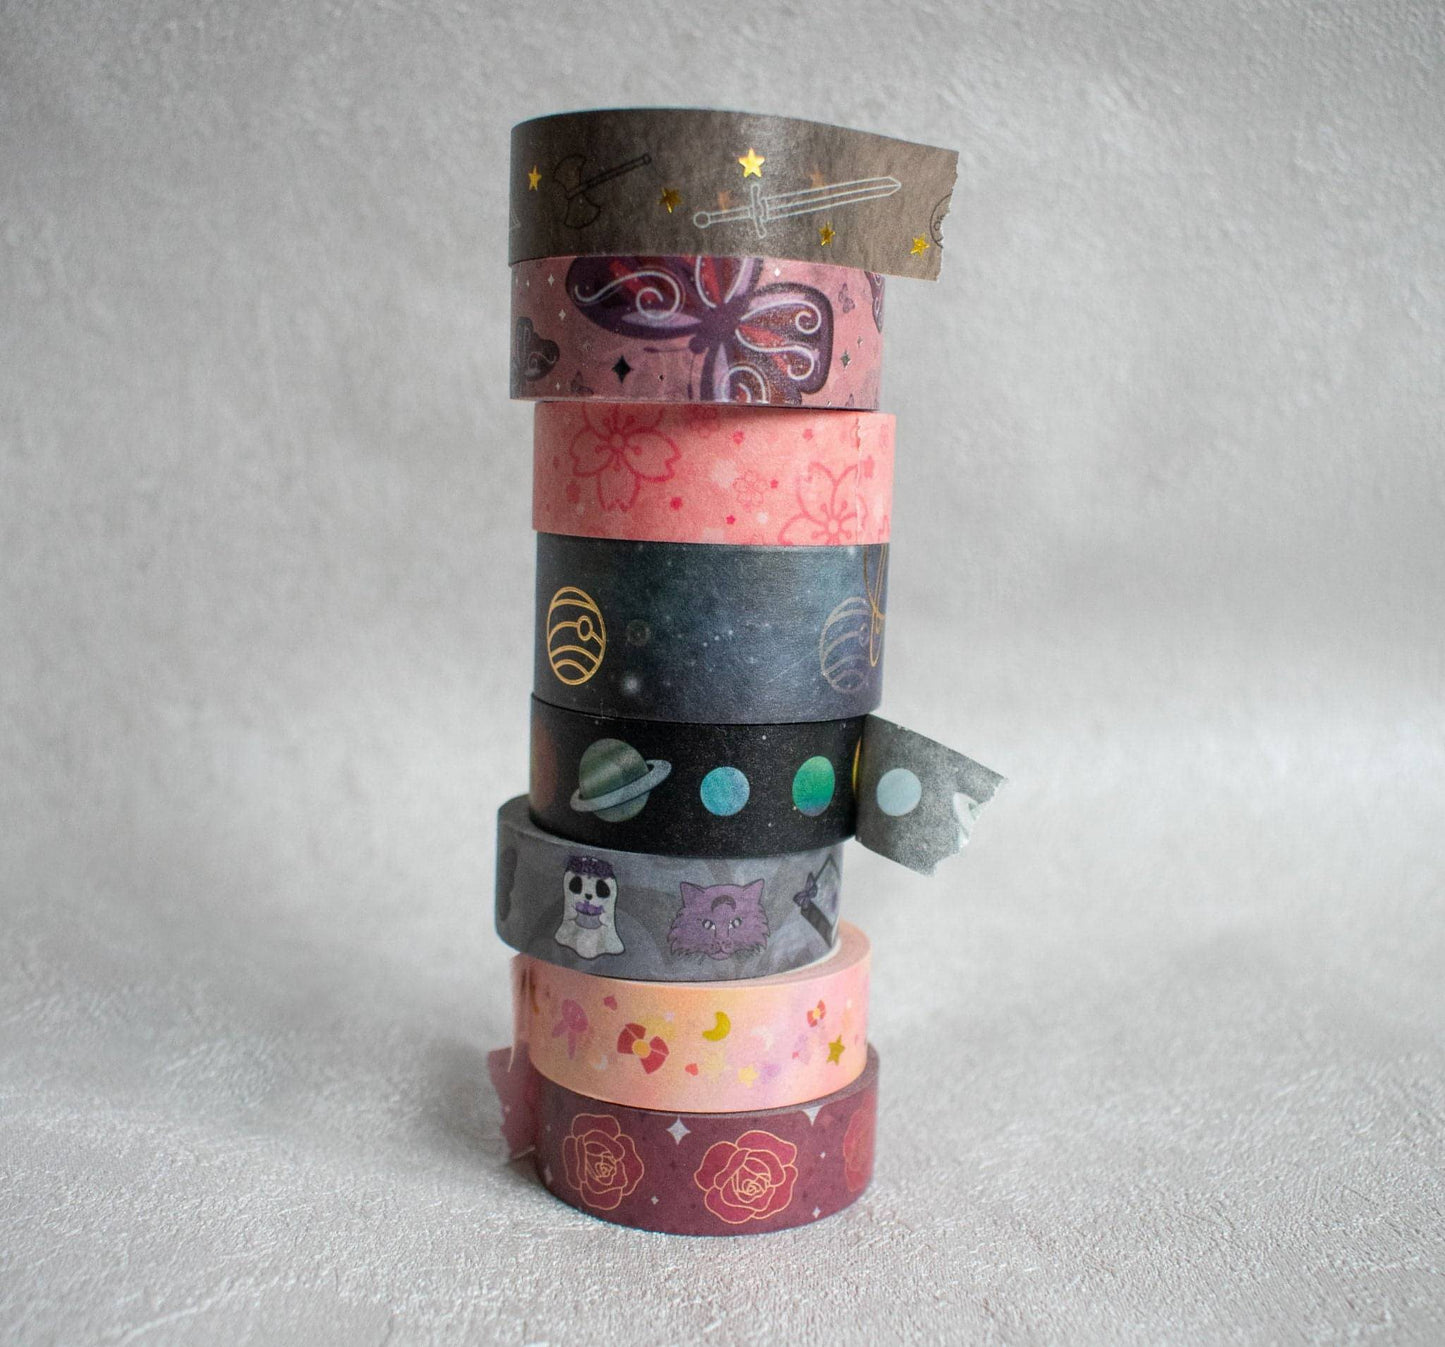 This photo is a clearer image of the stacked washi tape. They are all the tapes I've made as of January 2022. They are in order from top to bottom: fantasy, butterflies, sakura, celestial, galactic, spooky, anime, and roses.